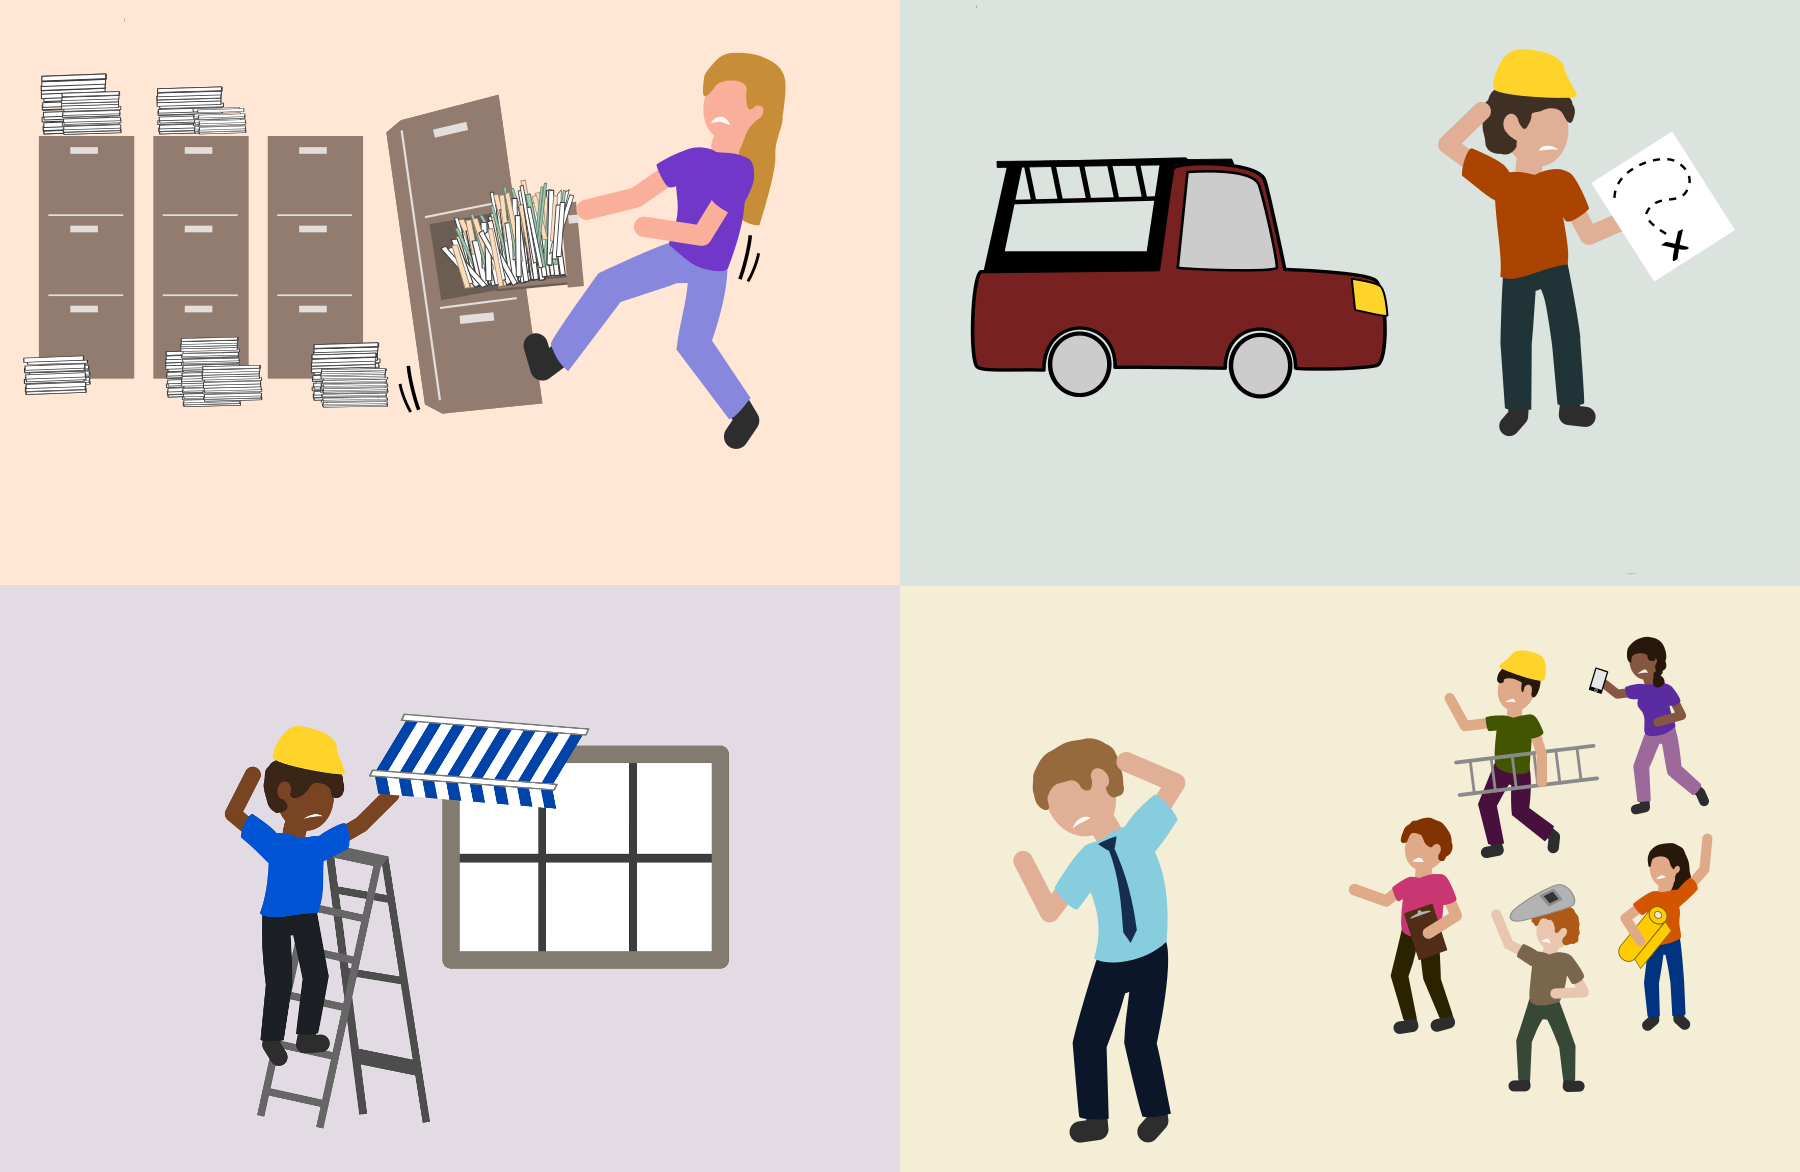 a grid of four images showing different mistakes people at an awning company might make: trouble with crowded filing cabinets, lost on the way to a job site, made an awning the wrong size, too hassled by employees to get work done